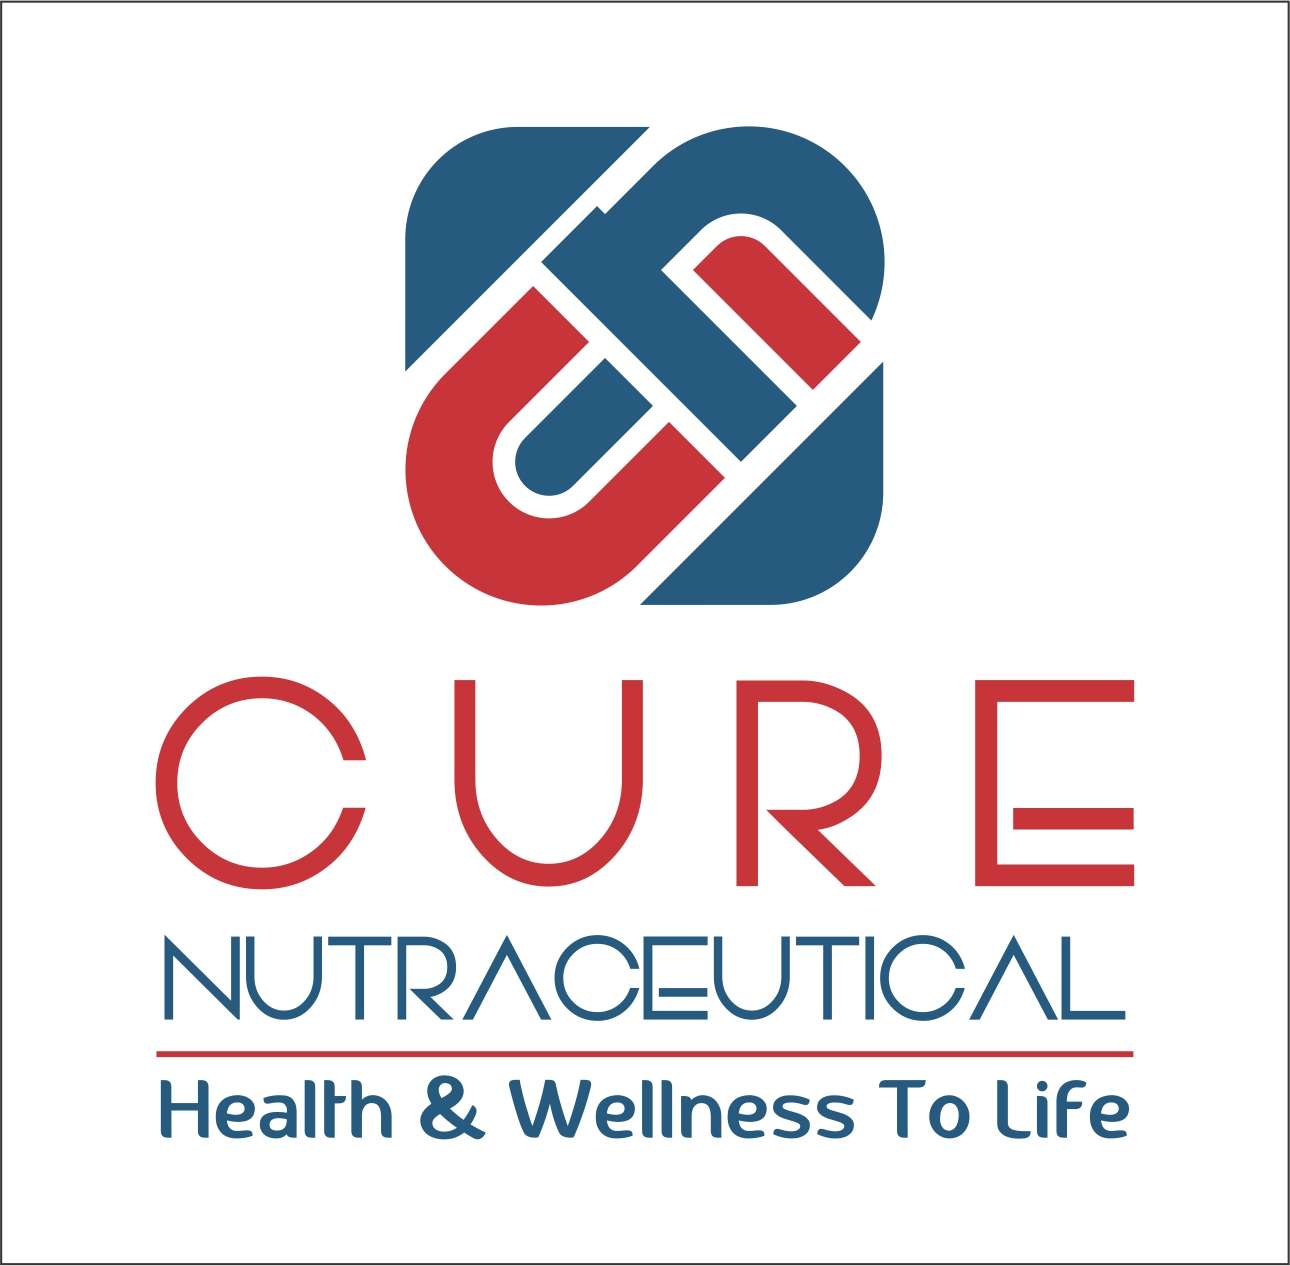 Cure Nutraceutical Pvt. Ltd.